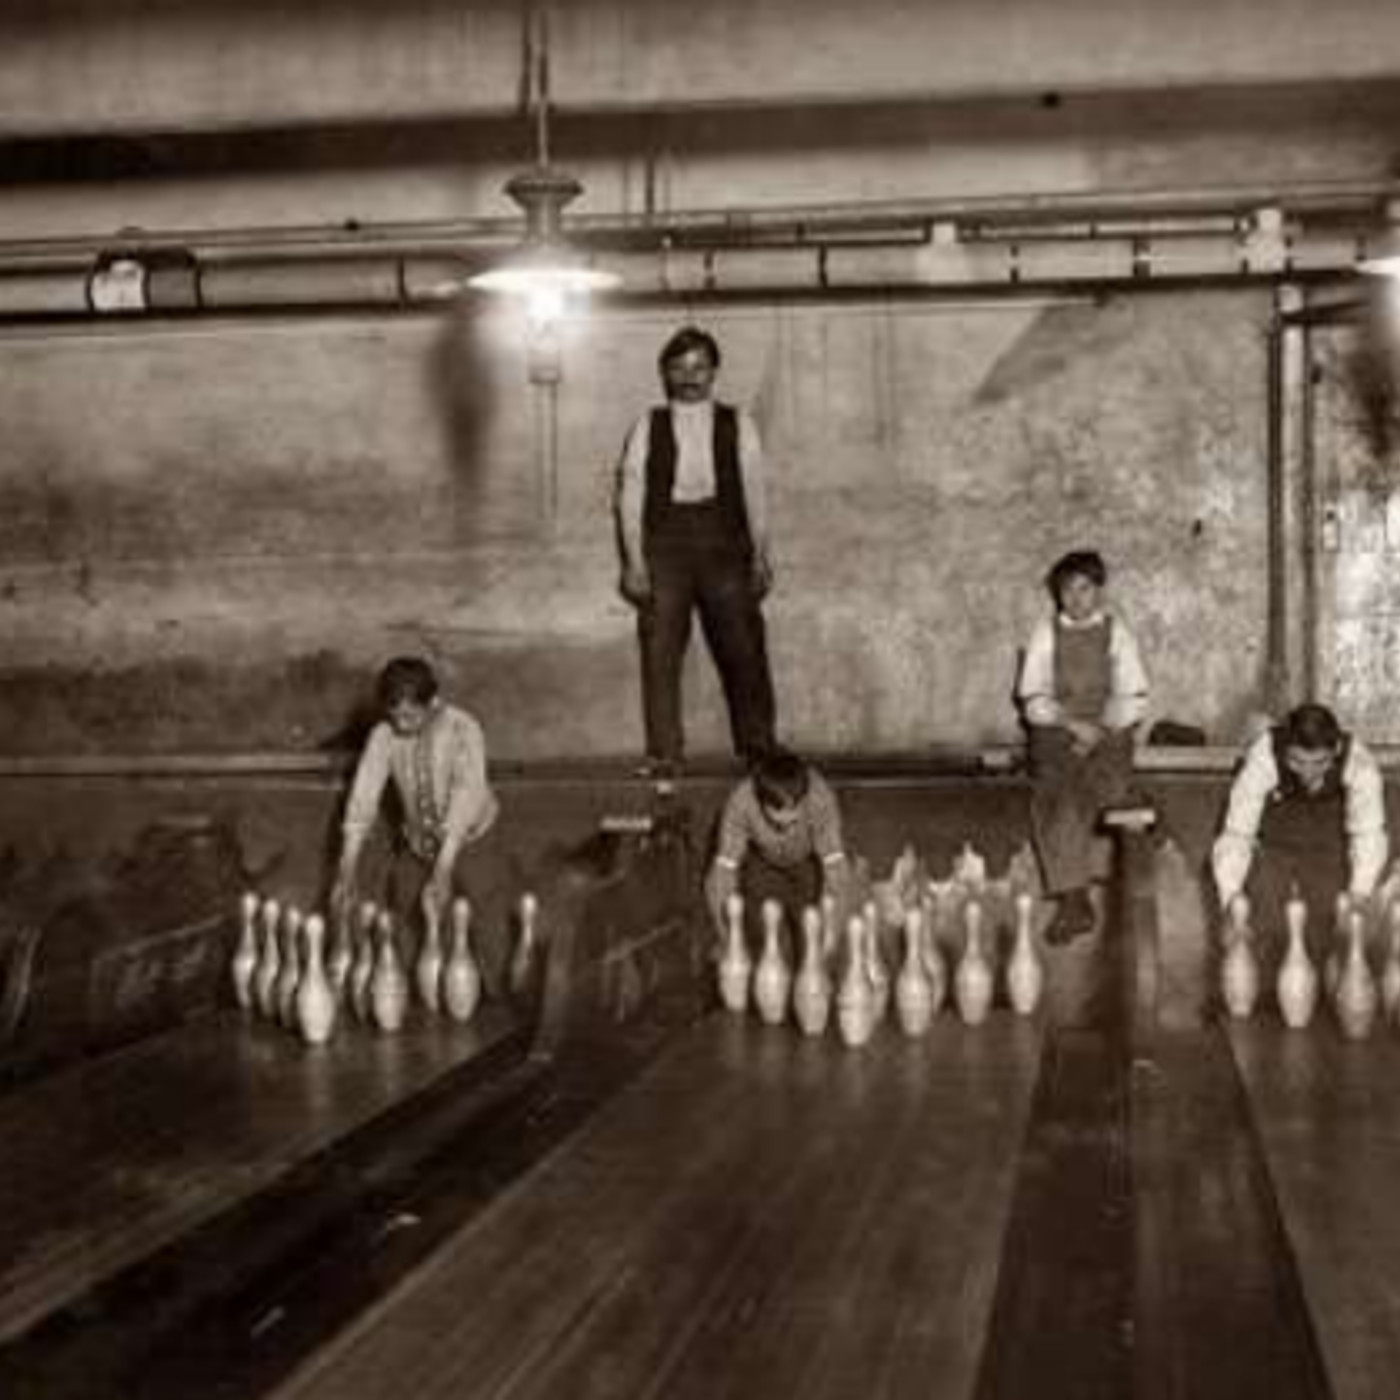 187 - The History of Bowling in America